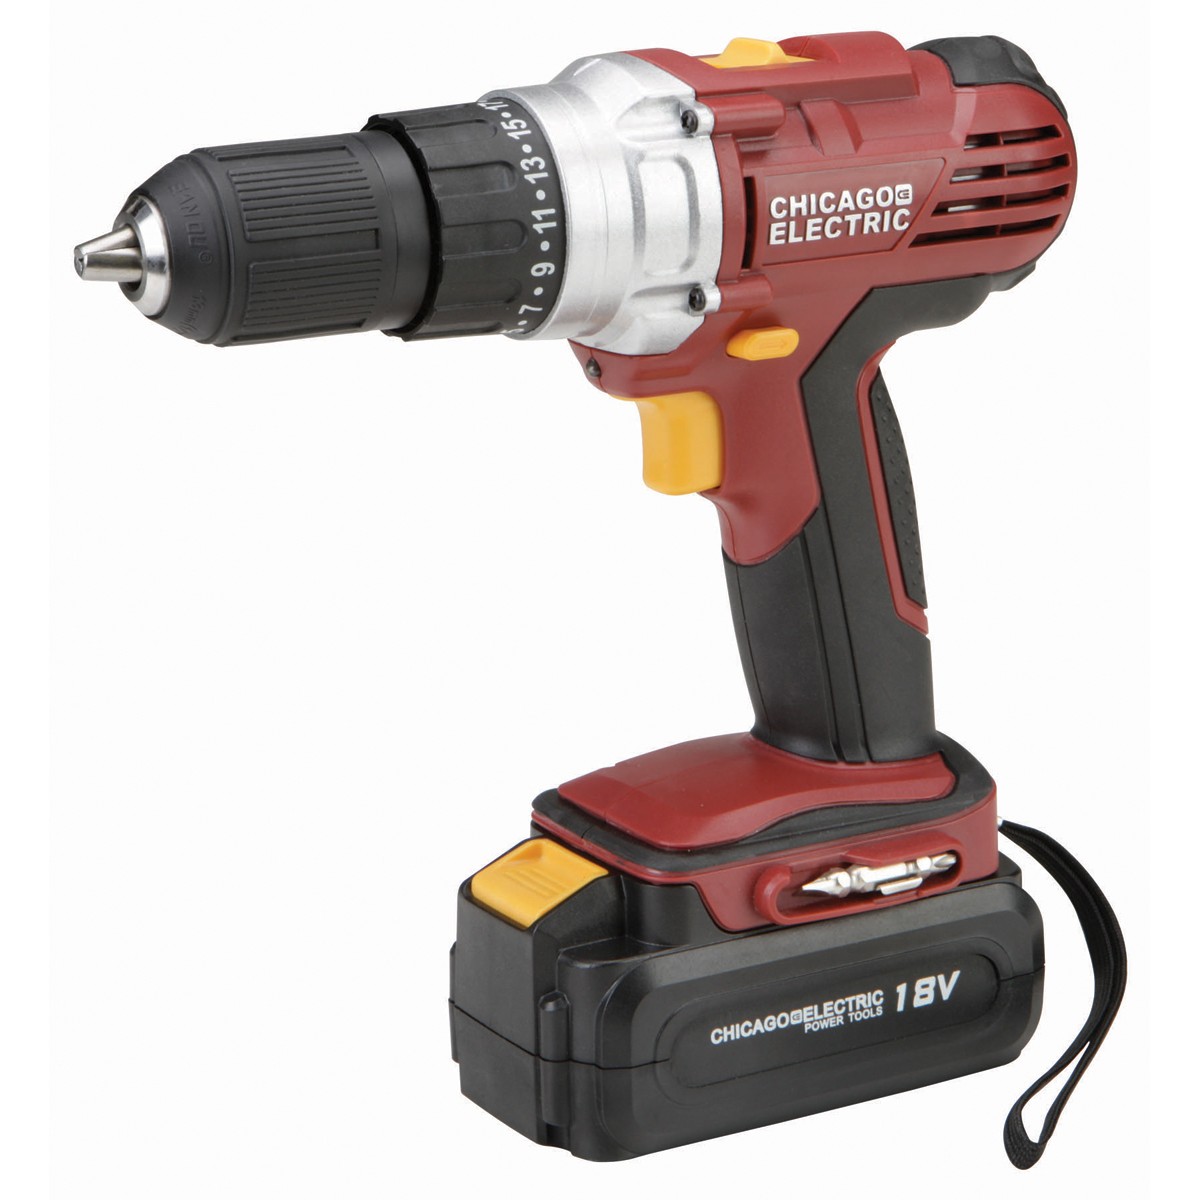 18 Volt Cordless 1/2 In. Drill/Driver With Keyless Chuck